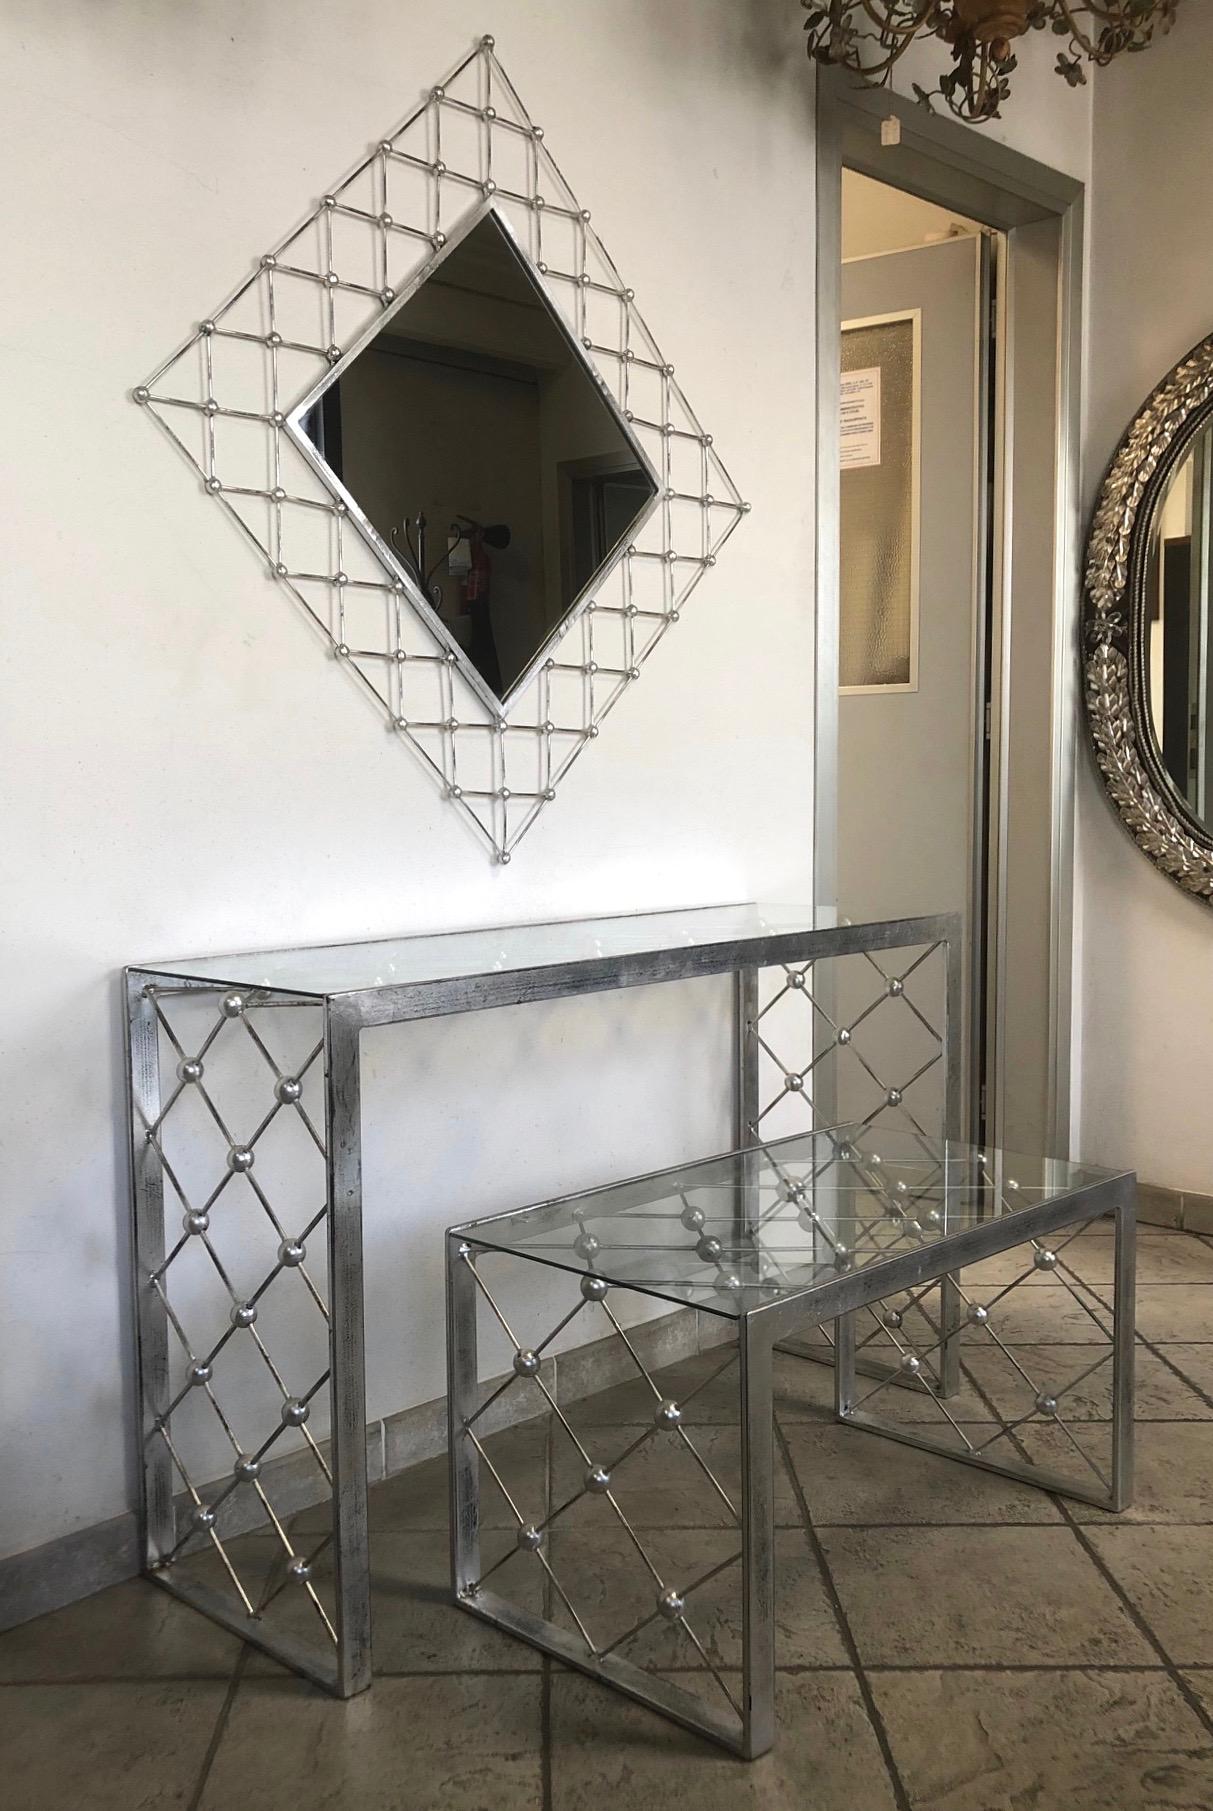 Italian Modern Industrial Design Criss Cross Fretwork Iron Console / Entry Table For Sale 4